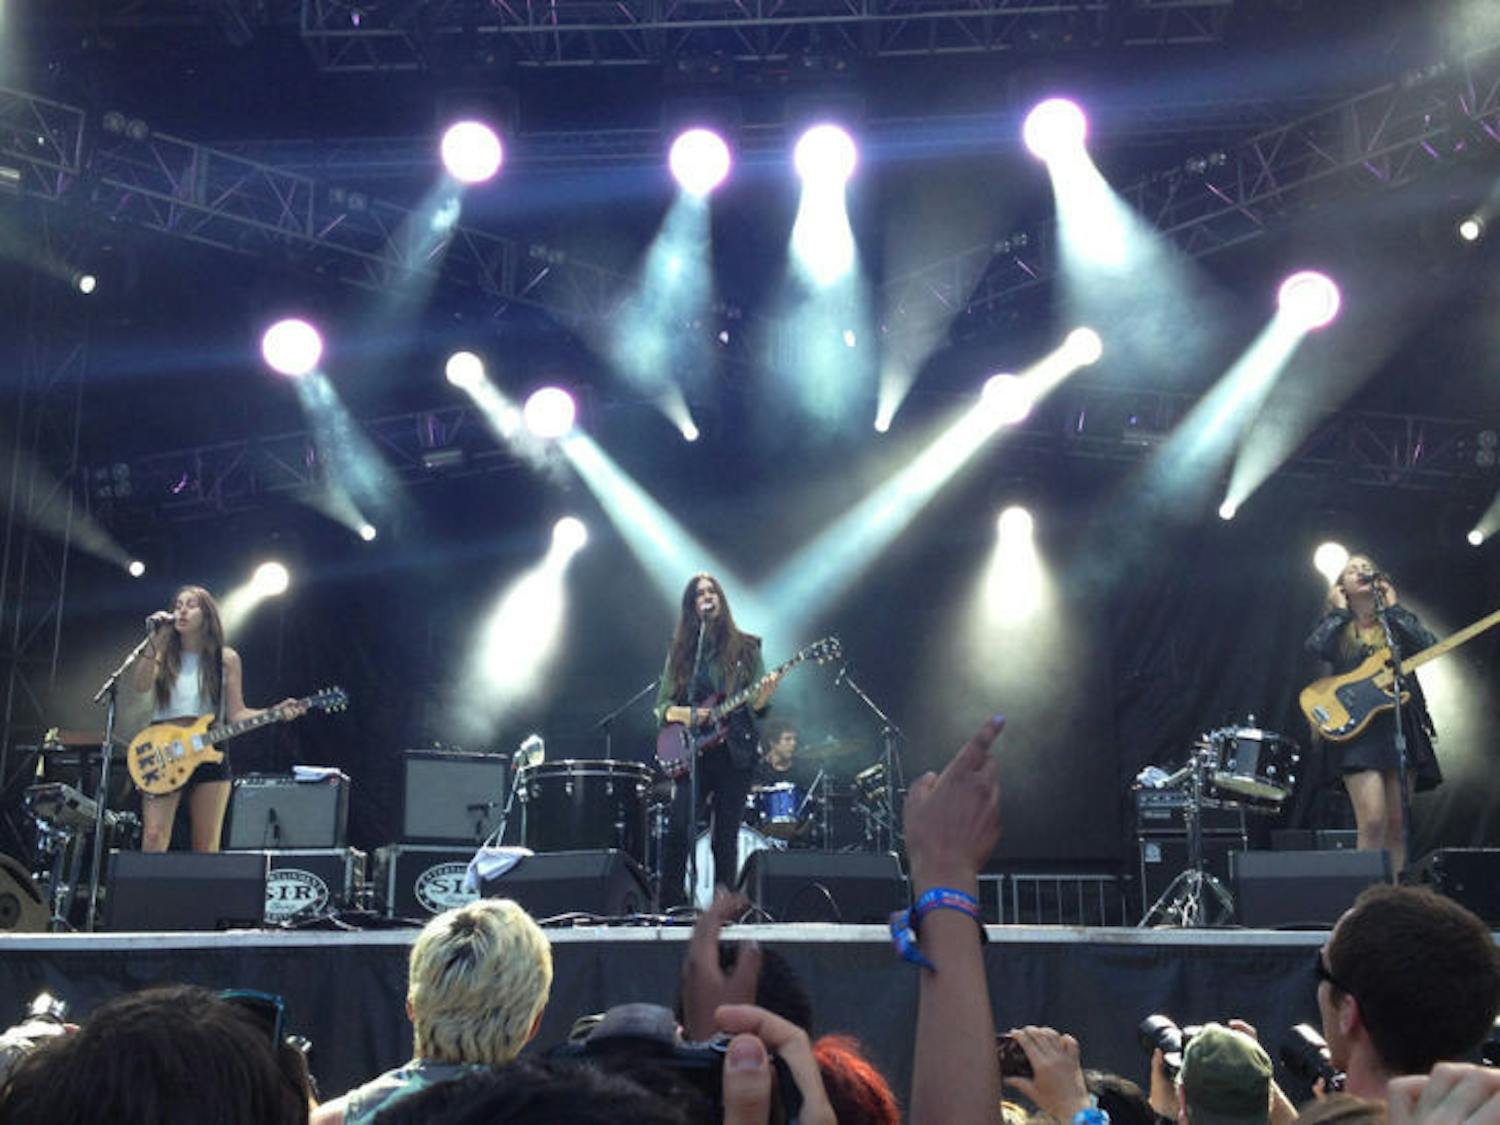 Alana Haim (left), Danielle Haim (center) and Este Haim (right) of HAIM perform at Lollapalooza in August in Chicago’s Grant Park to promote their new album “Days are Gone,” which was released Sept. 30.